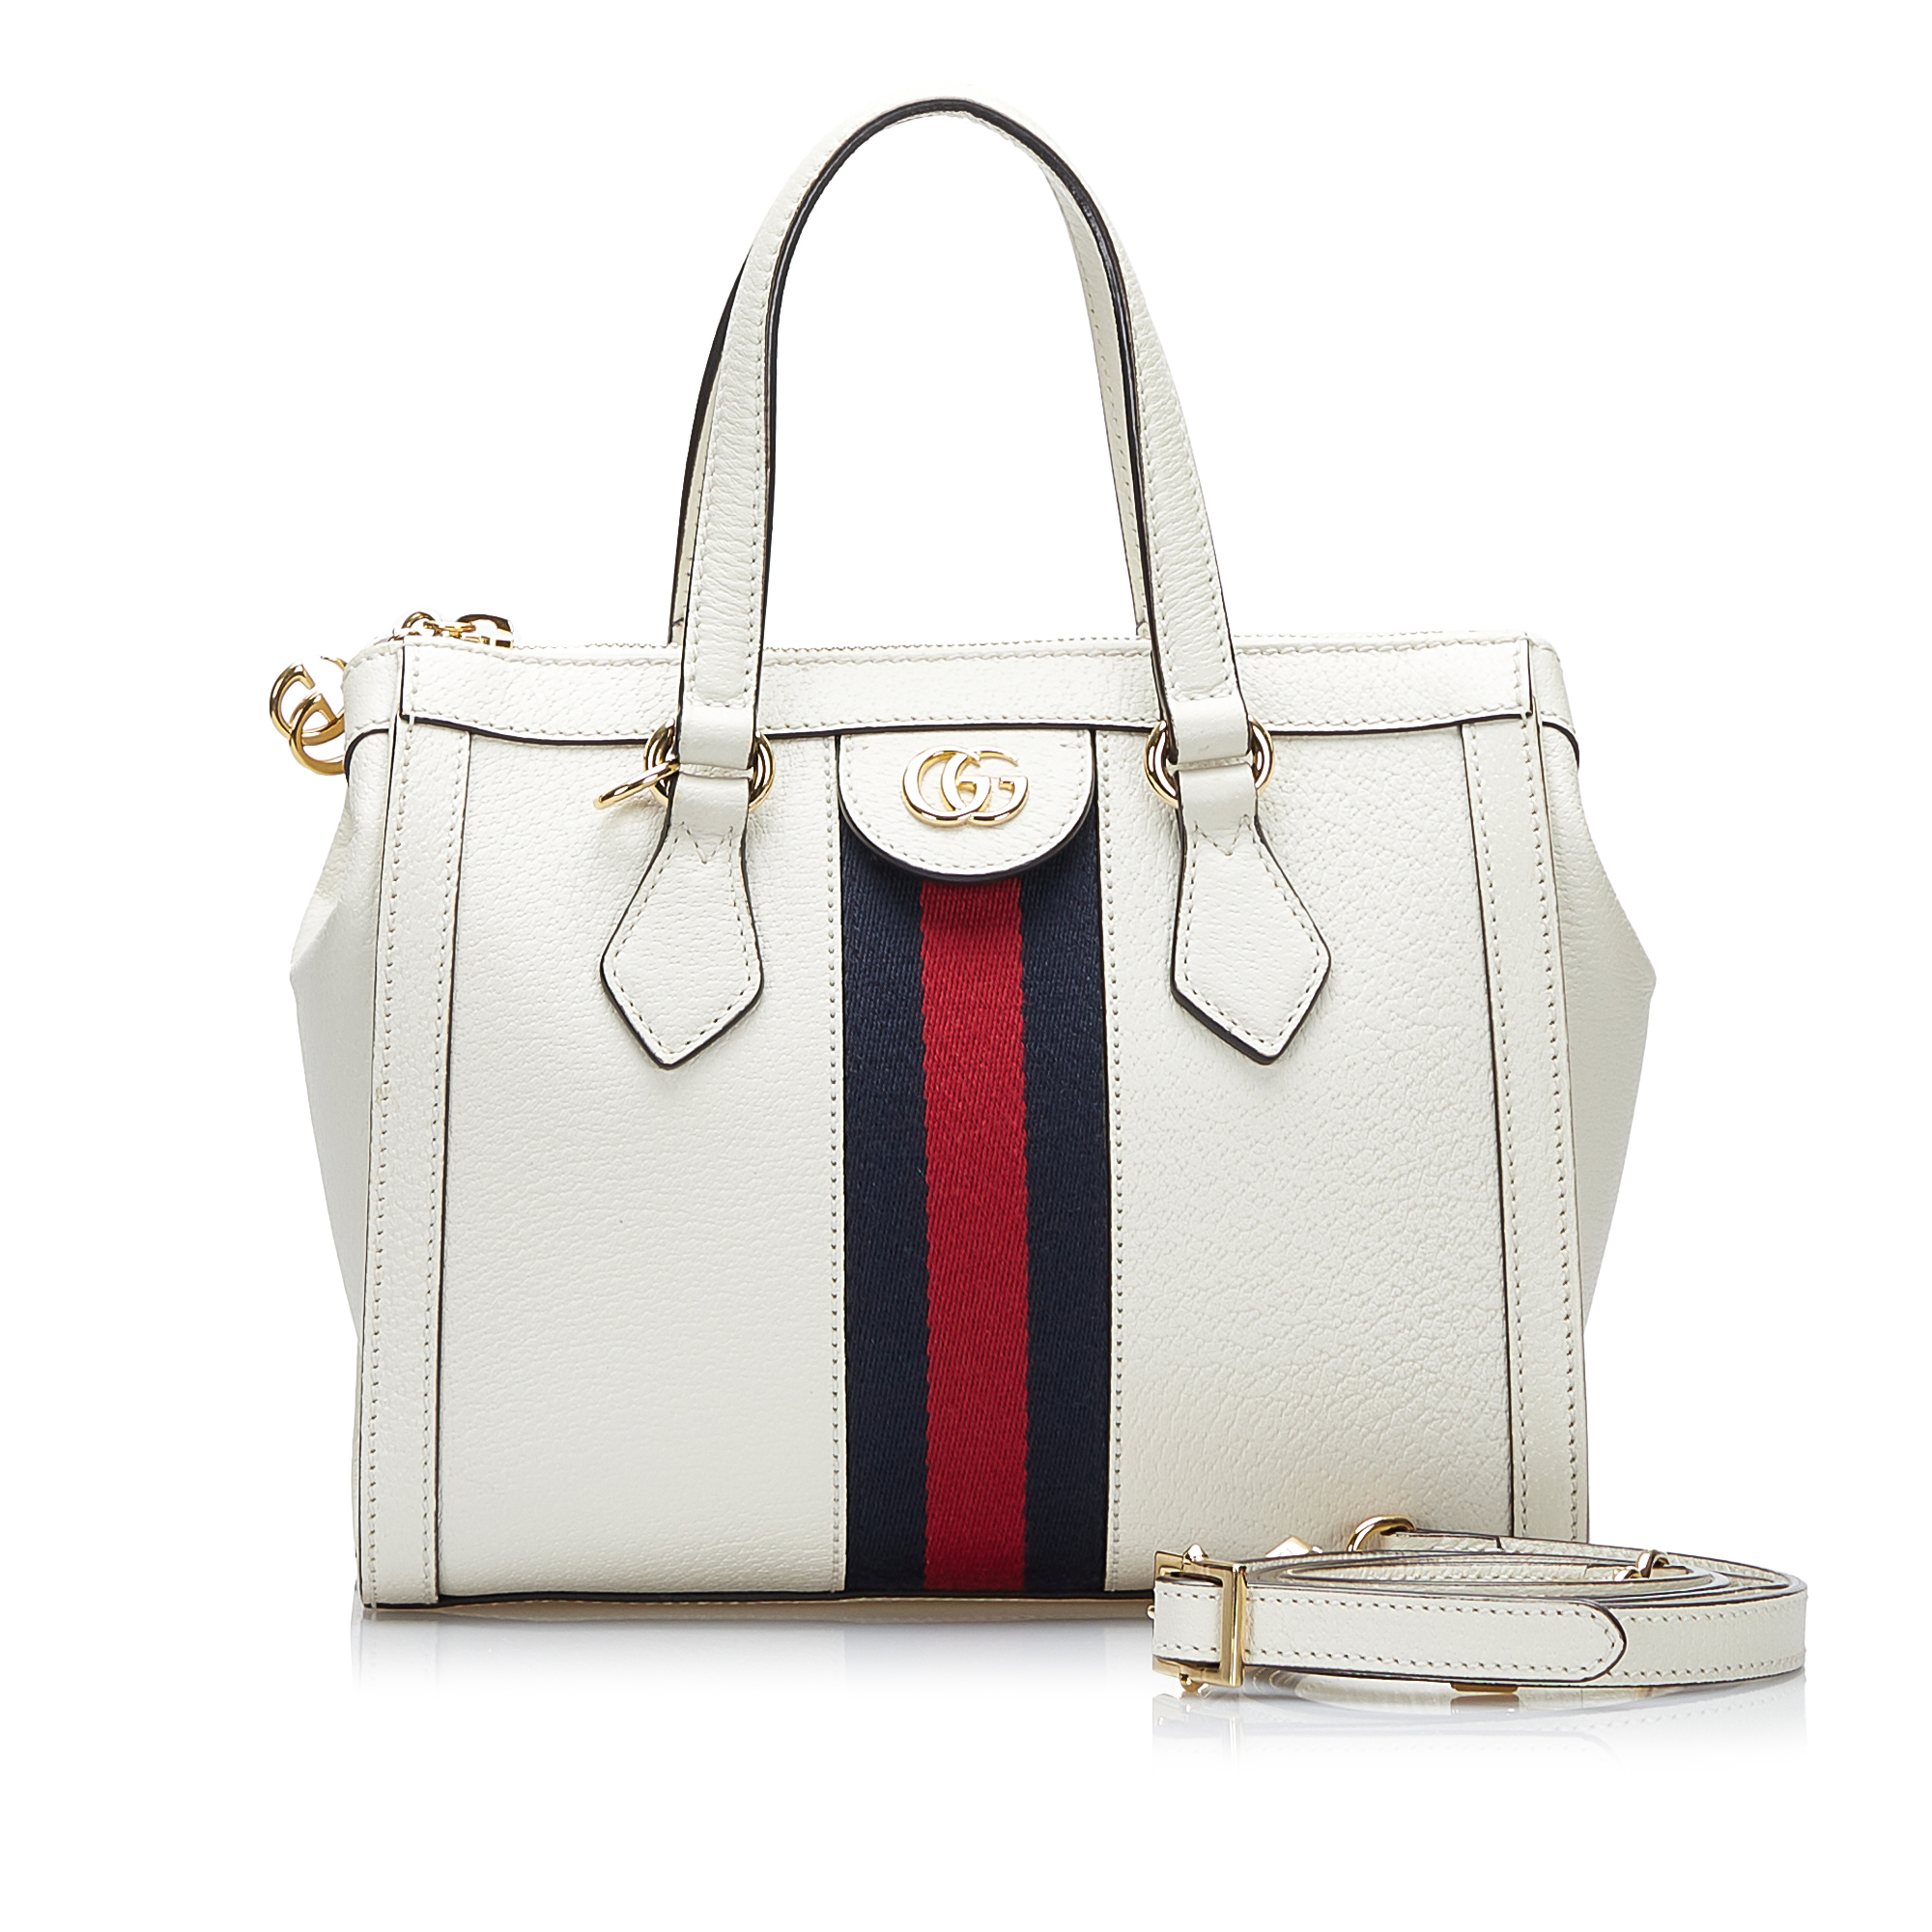 Gucci Ophidia Leather Satchel